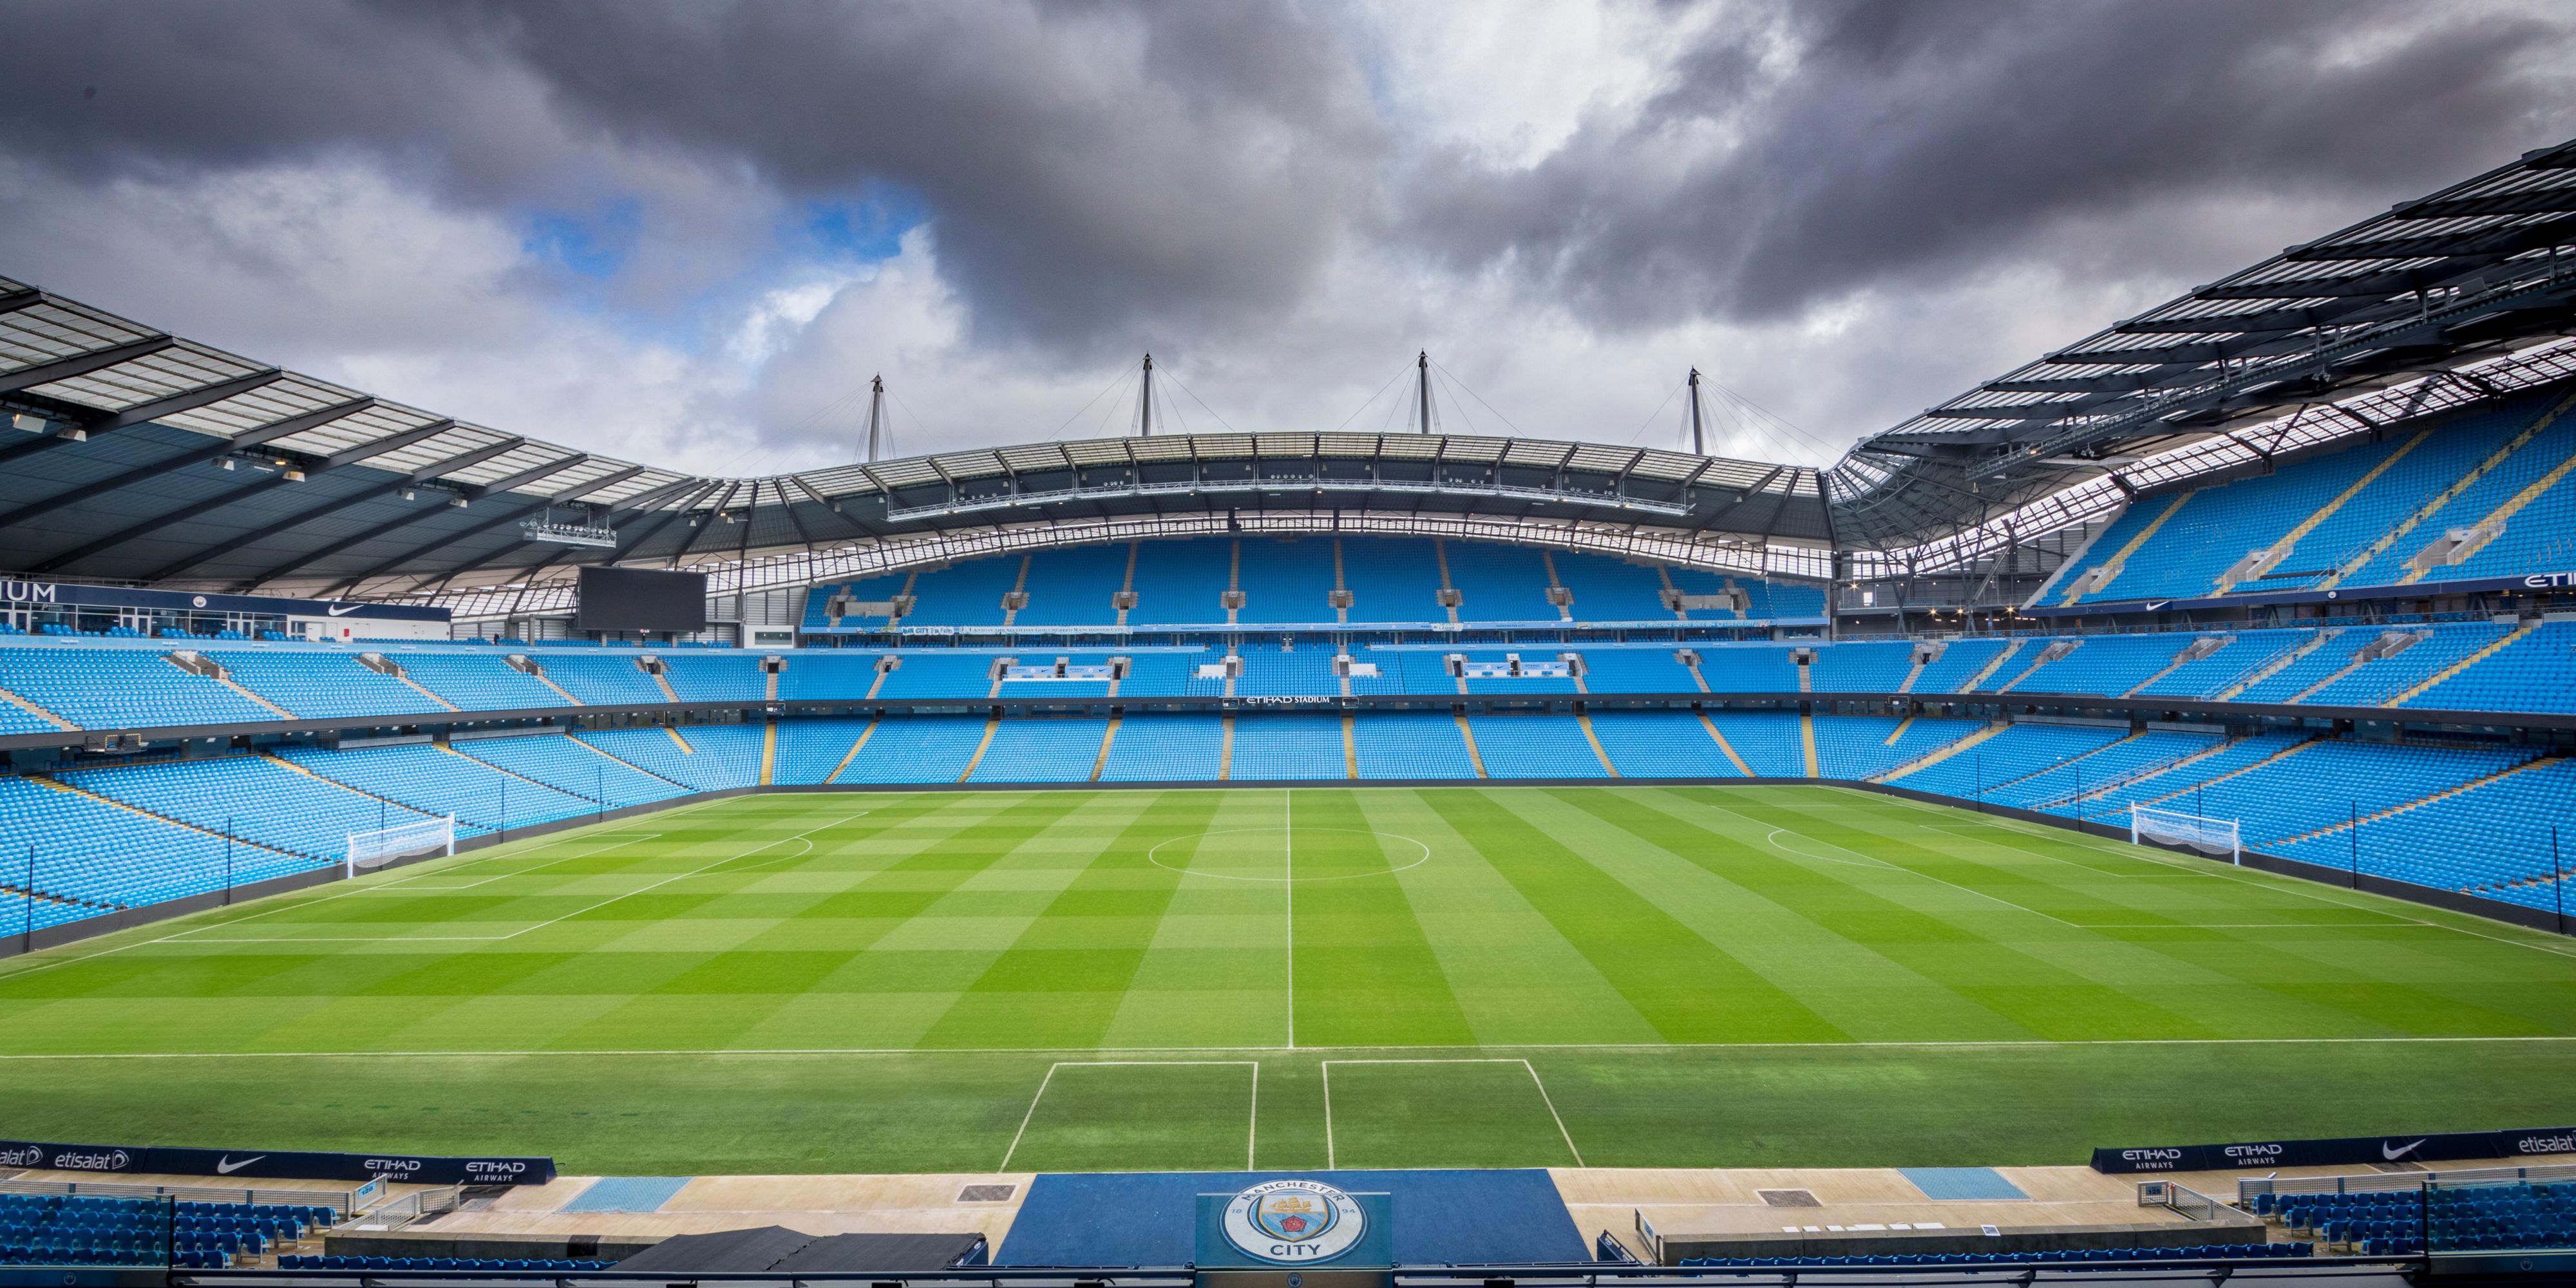 Manchester Sportcity, home to the largest concentration of sporting venues in Europe, is a 15-minute drive away. Visit Man City's Etihad Stadium, the HSBC National Cycling Centre, Manchester Regional Tennis Centre, National Squash Centre or the Regional Athletics Arena using our hotel as a handy base. Game on!